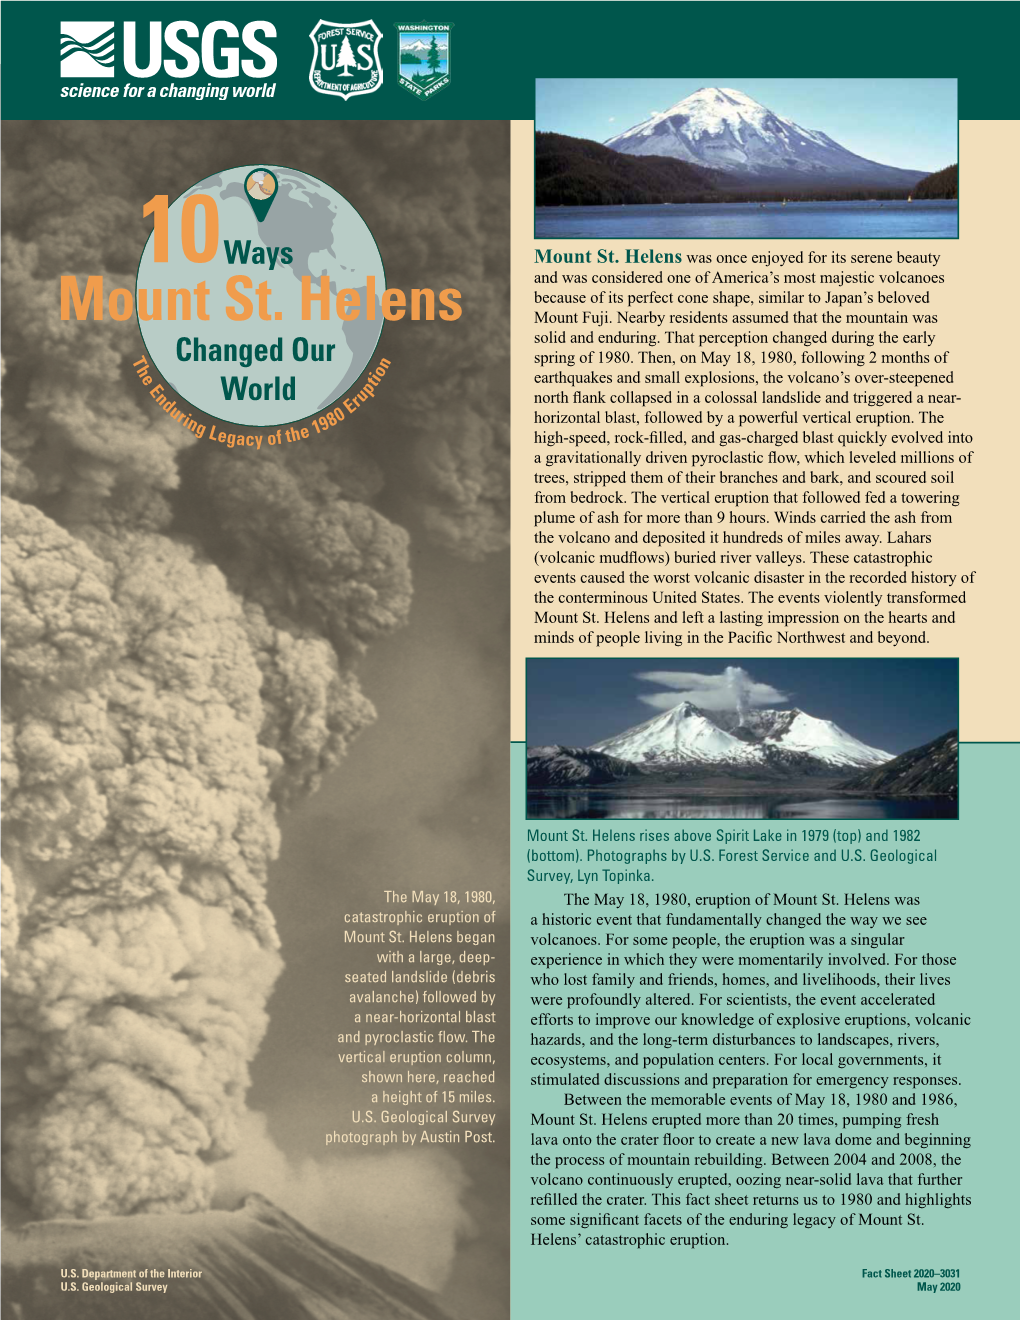 Ten Ways Mount St. Helens Changed Our World—The Enduring Legacy of the 1980 Eruption